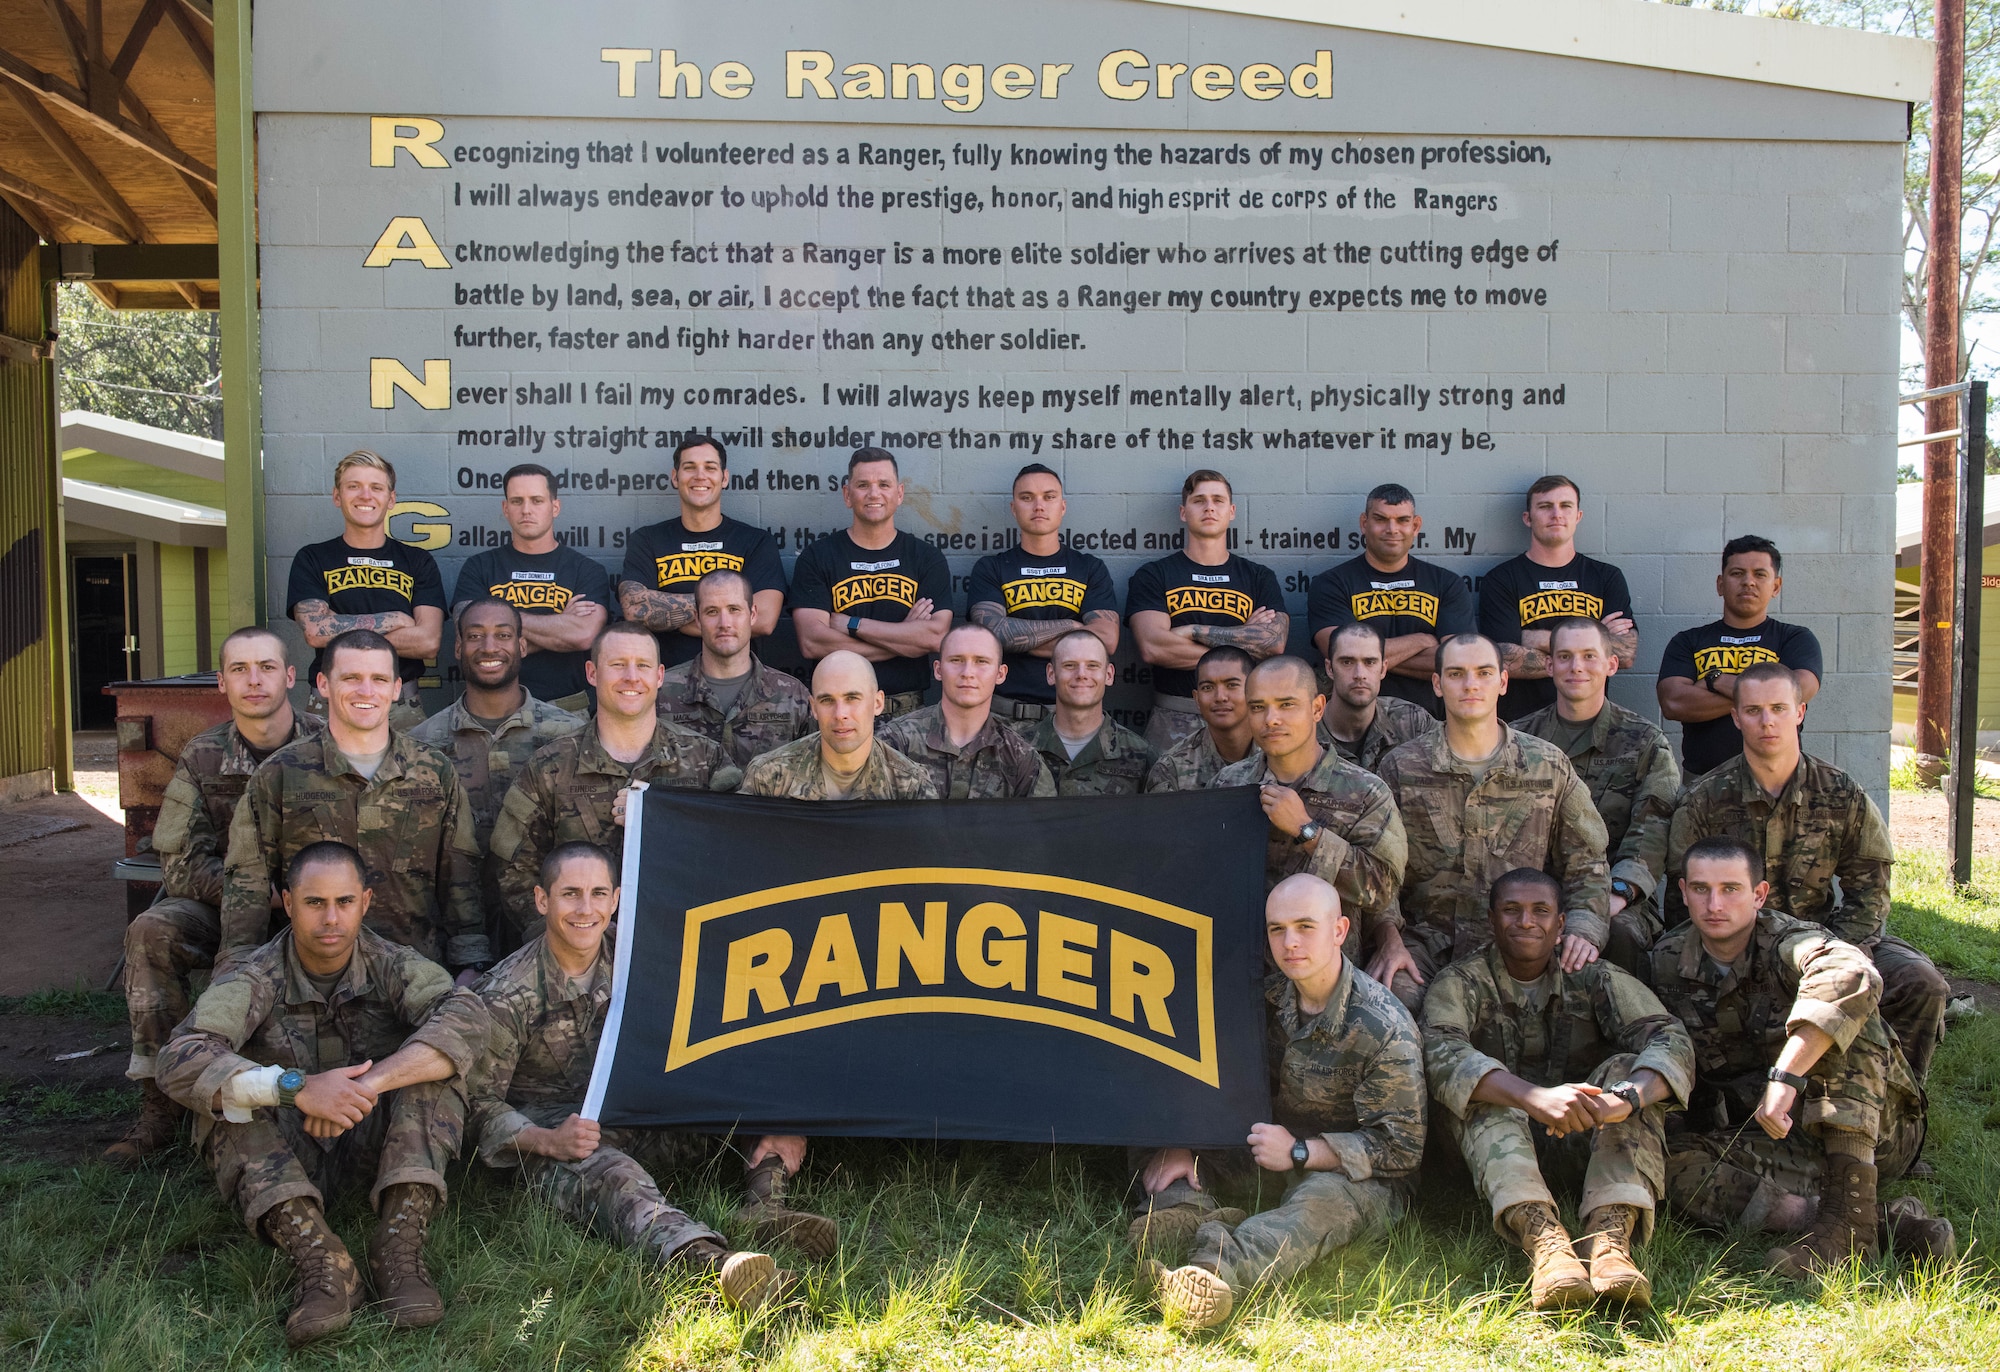 Ranger Assessment Course students and cadre pose for a group photo at the end of the 19-day course near Schofield Barracks, Oahu, Hawaii, May 29, 2019. The purpose of the three-week course is to prepare, assess and evaluate Air Force candidates for Army Ranger School. Of the 23 Airmen who began the Ranger Assessment Course, three dropped for personal motivational reasons and one dropped for medical reasons, leaving 19 standing at the end. Out of the 19, 11 Airmen met all the standards needed for a recommendation to go forward to Ranger School. (U.S. Air Force photo by Staff Sgt. Hailey Haux)